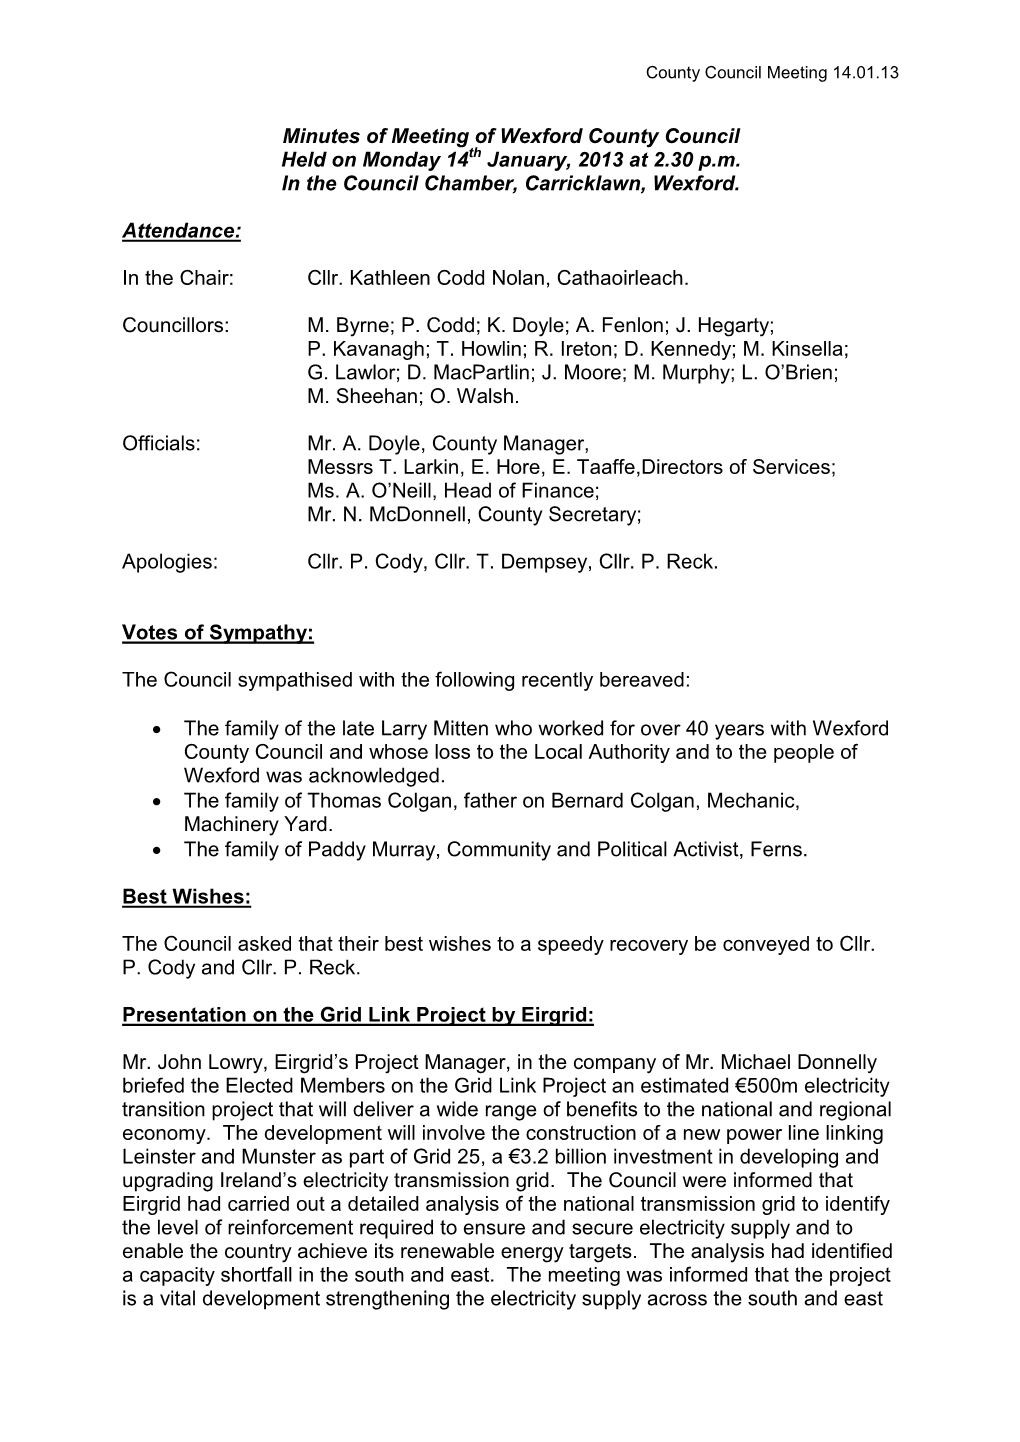 Minutes of Meeting of Wexford County Council Held on Monday 14Th January, 2013 at 2.30 P.M